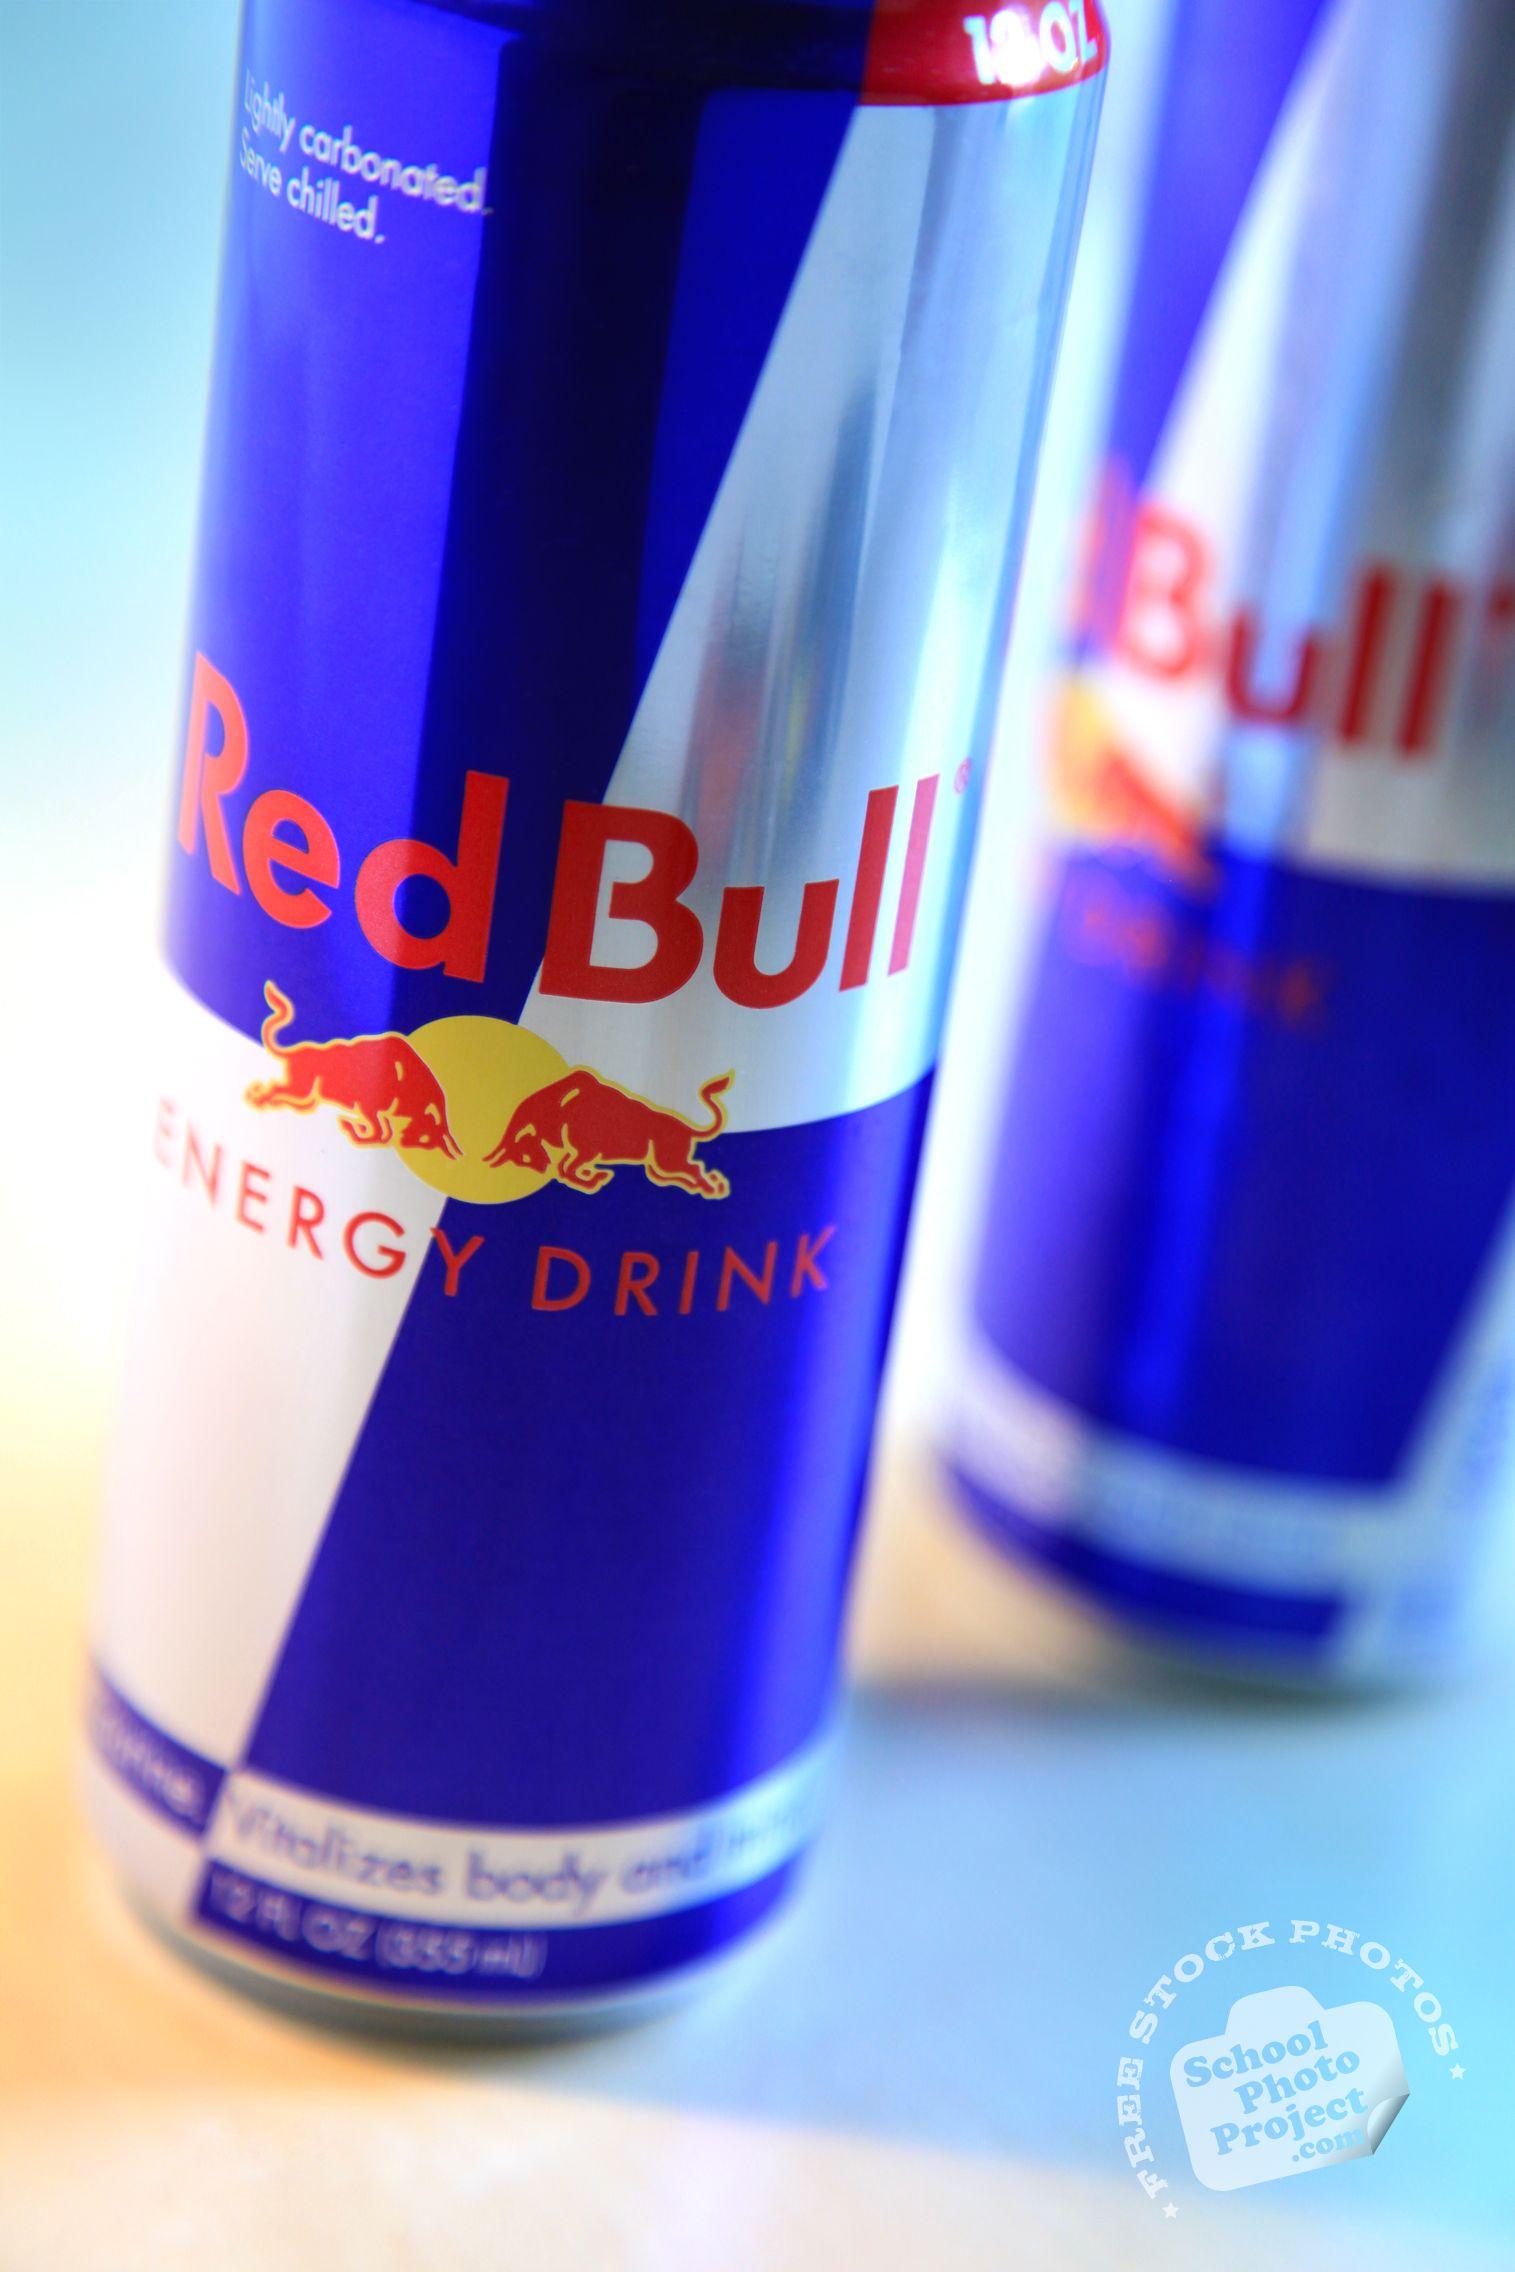 Famous Bull Logo - Red Bull Logo, FREE Stock Photo, Image, Picture: Red Bull's Cans ...